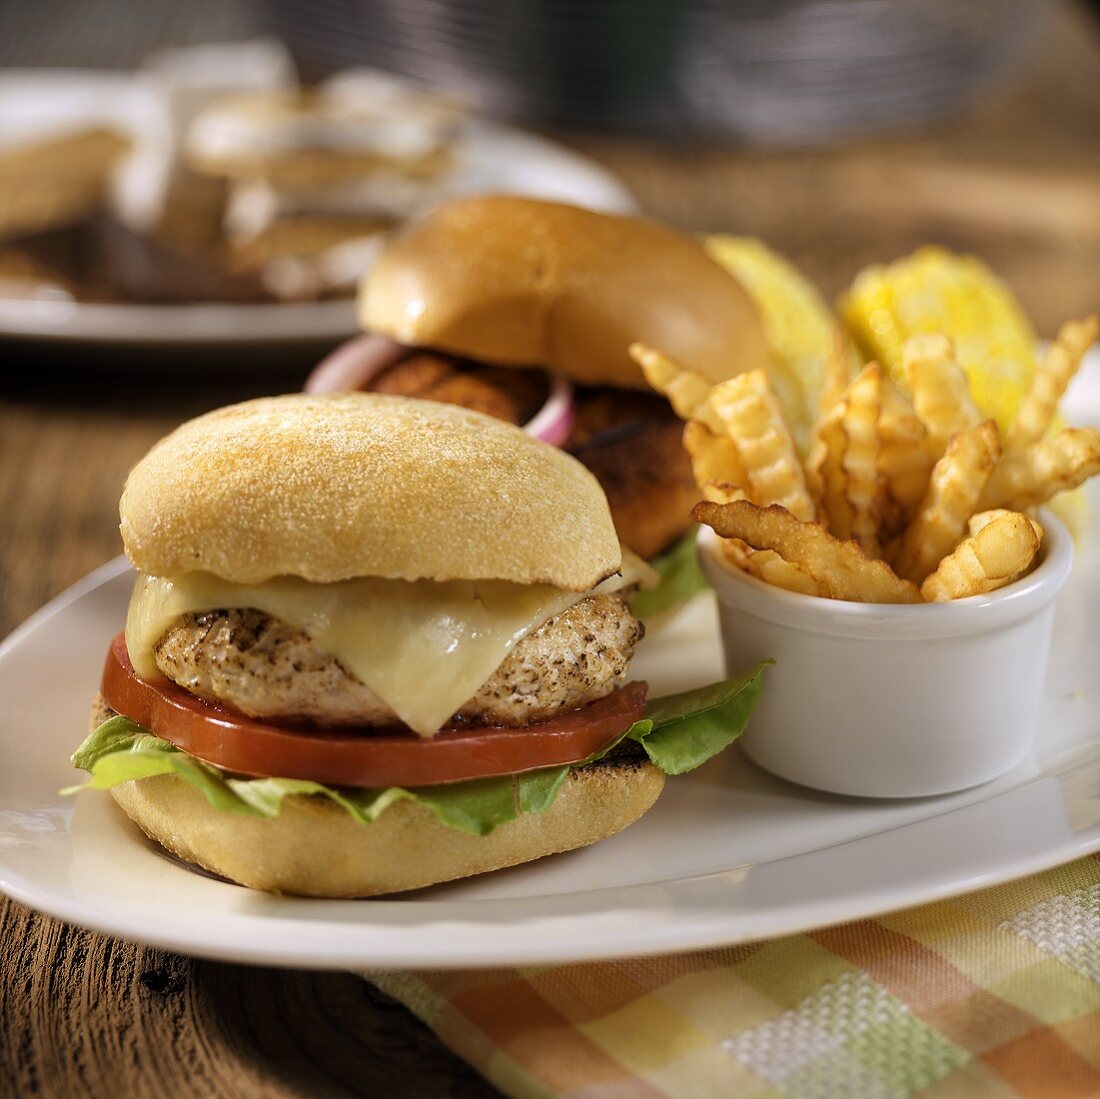 Turkey cheese burger with chips